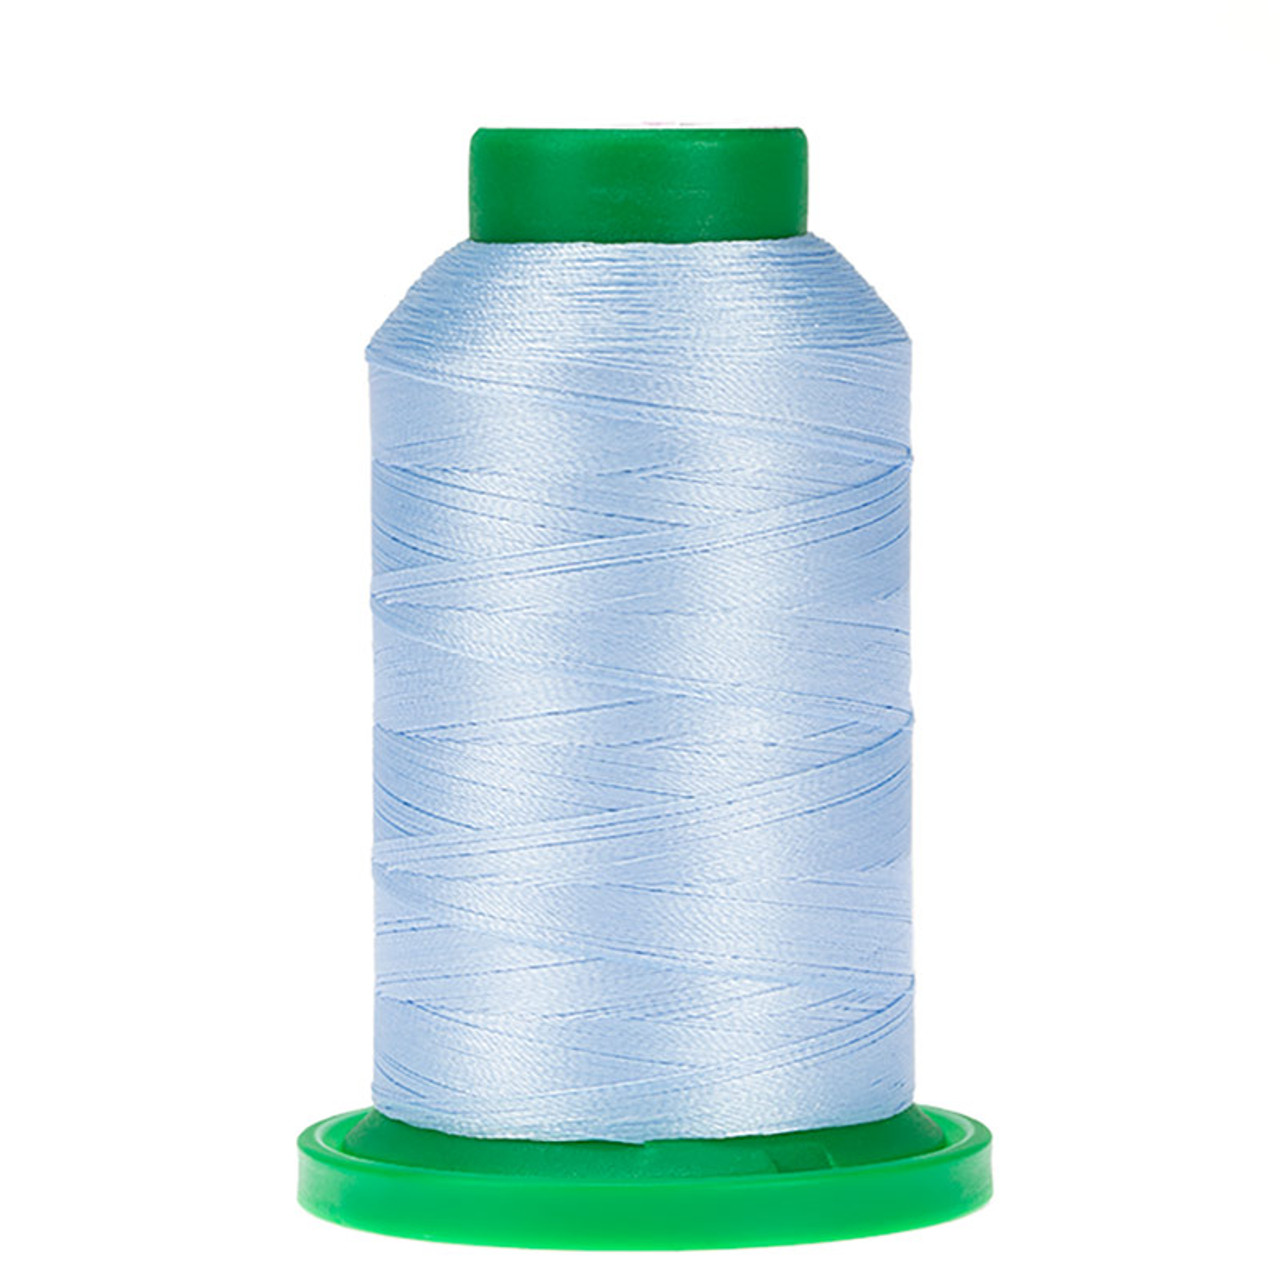 Isacord Embroidery Thread 3730 Something Blue – The Little Shop of Stitches